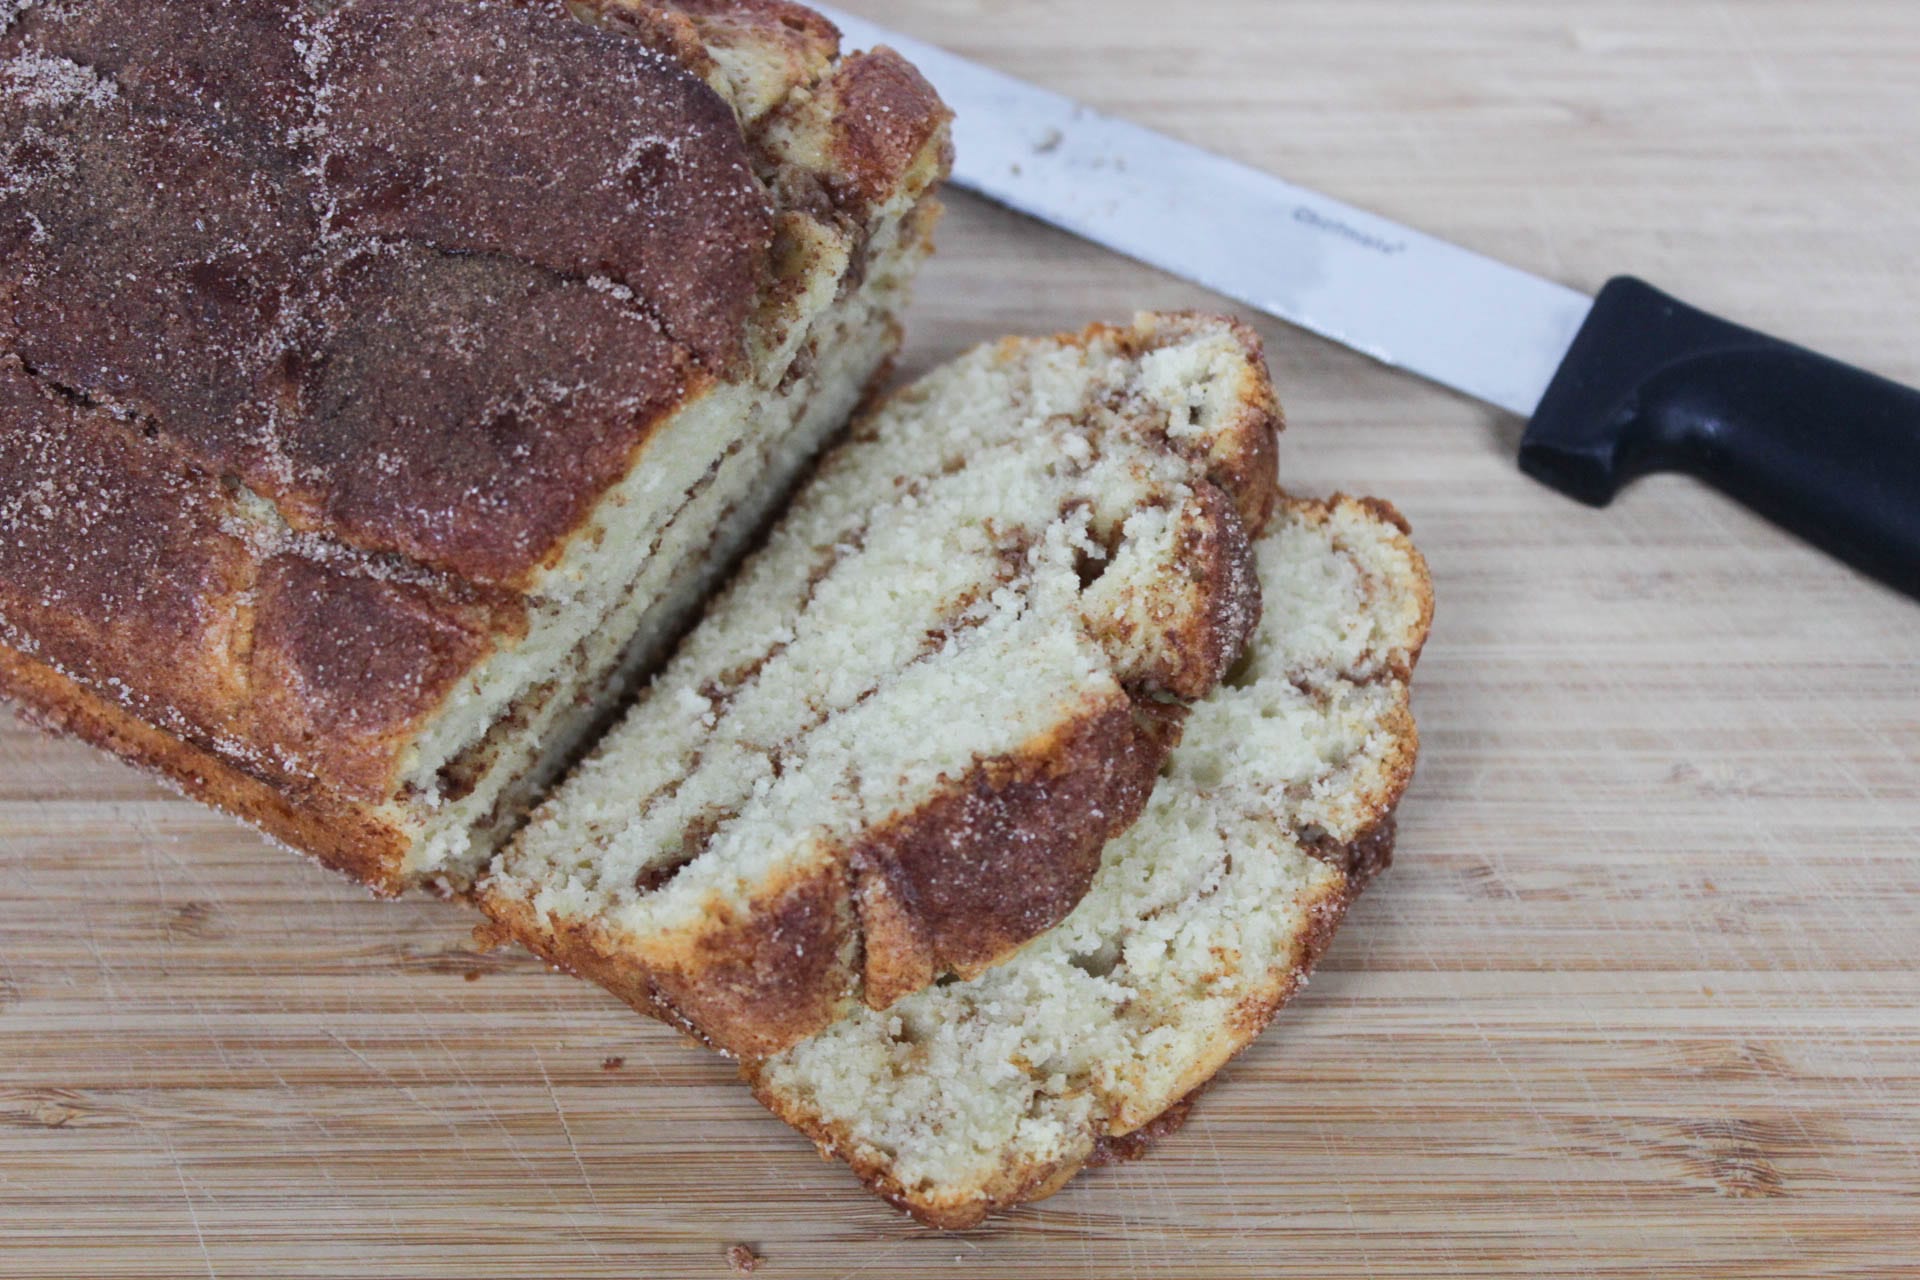 Sliced cinnamon loaf bread on cutting board with knife in background